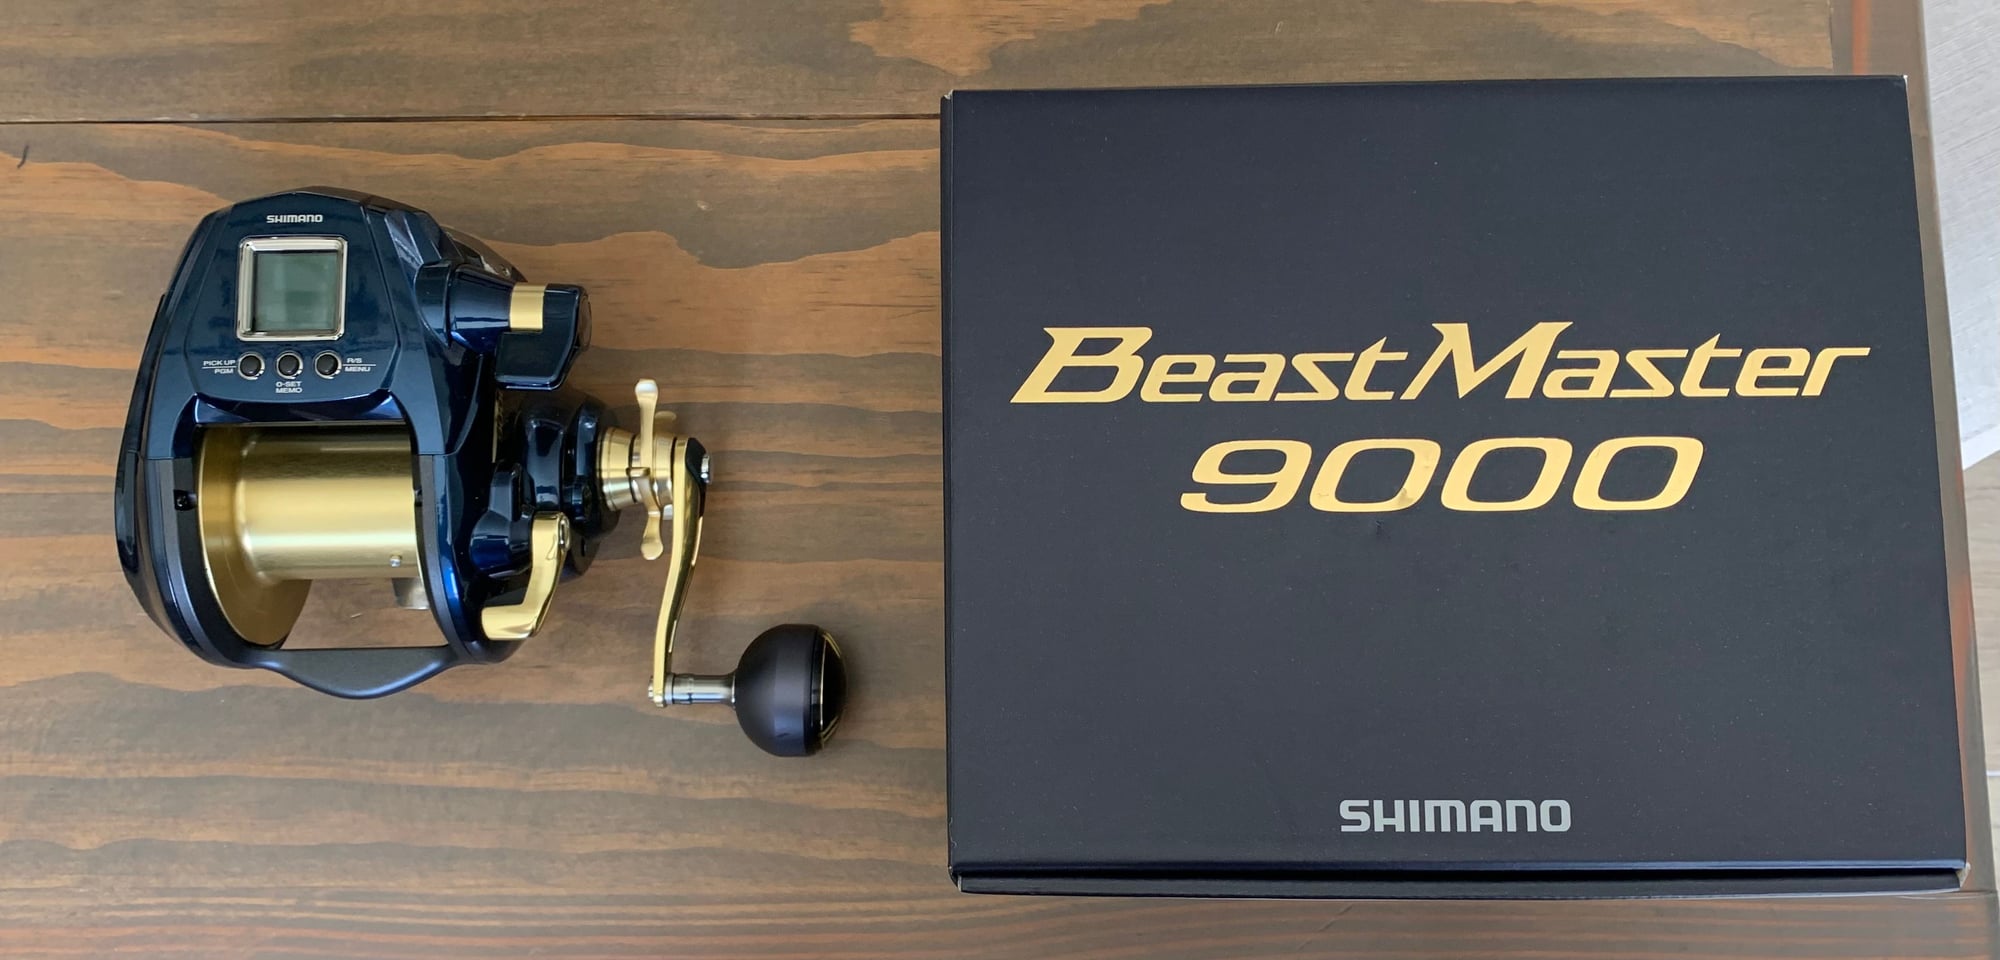 For sale BeastMaster 9000A new in box (pics of actual reel) - The Hull Truth  - Boating and Fishing Forum